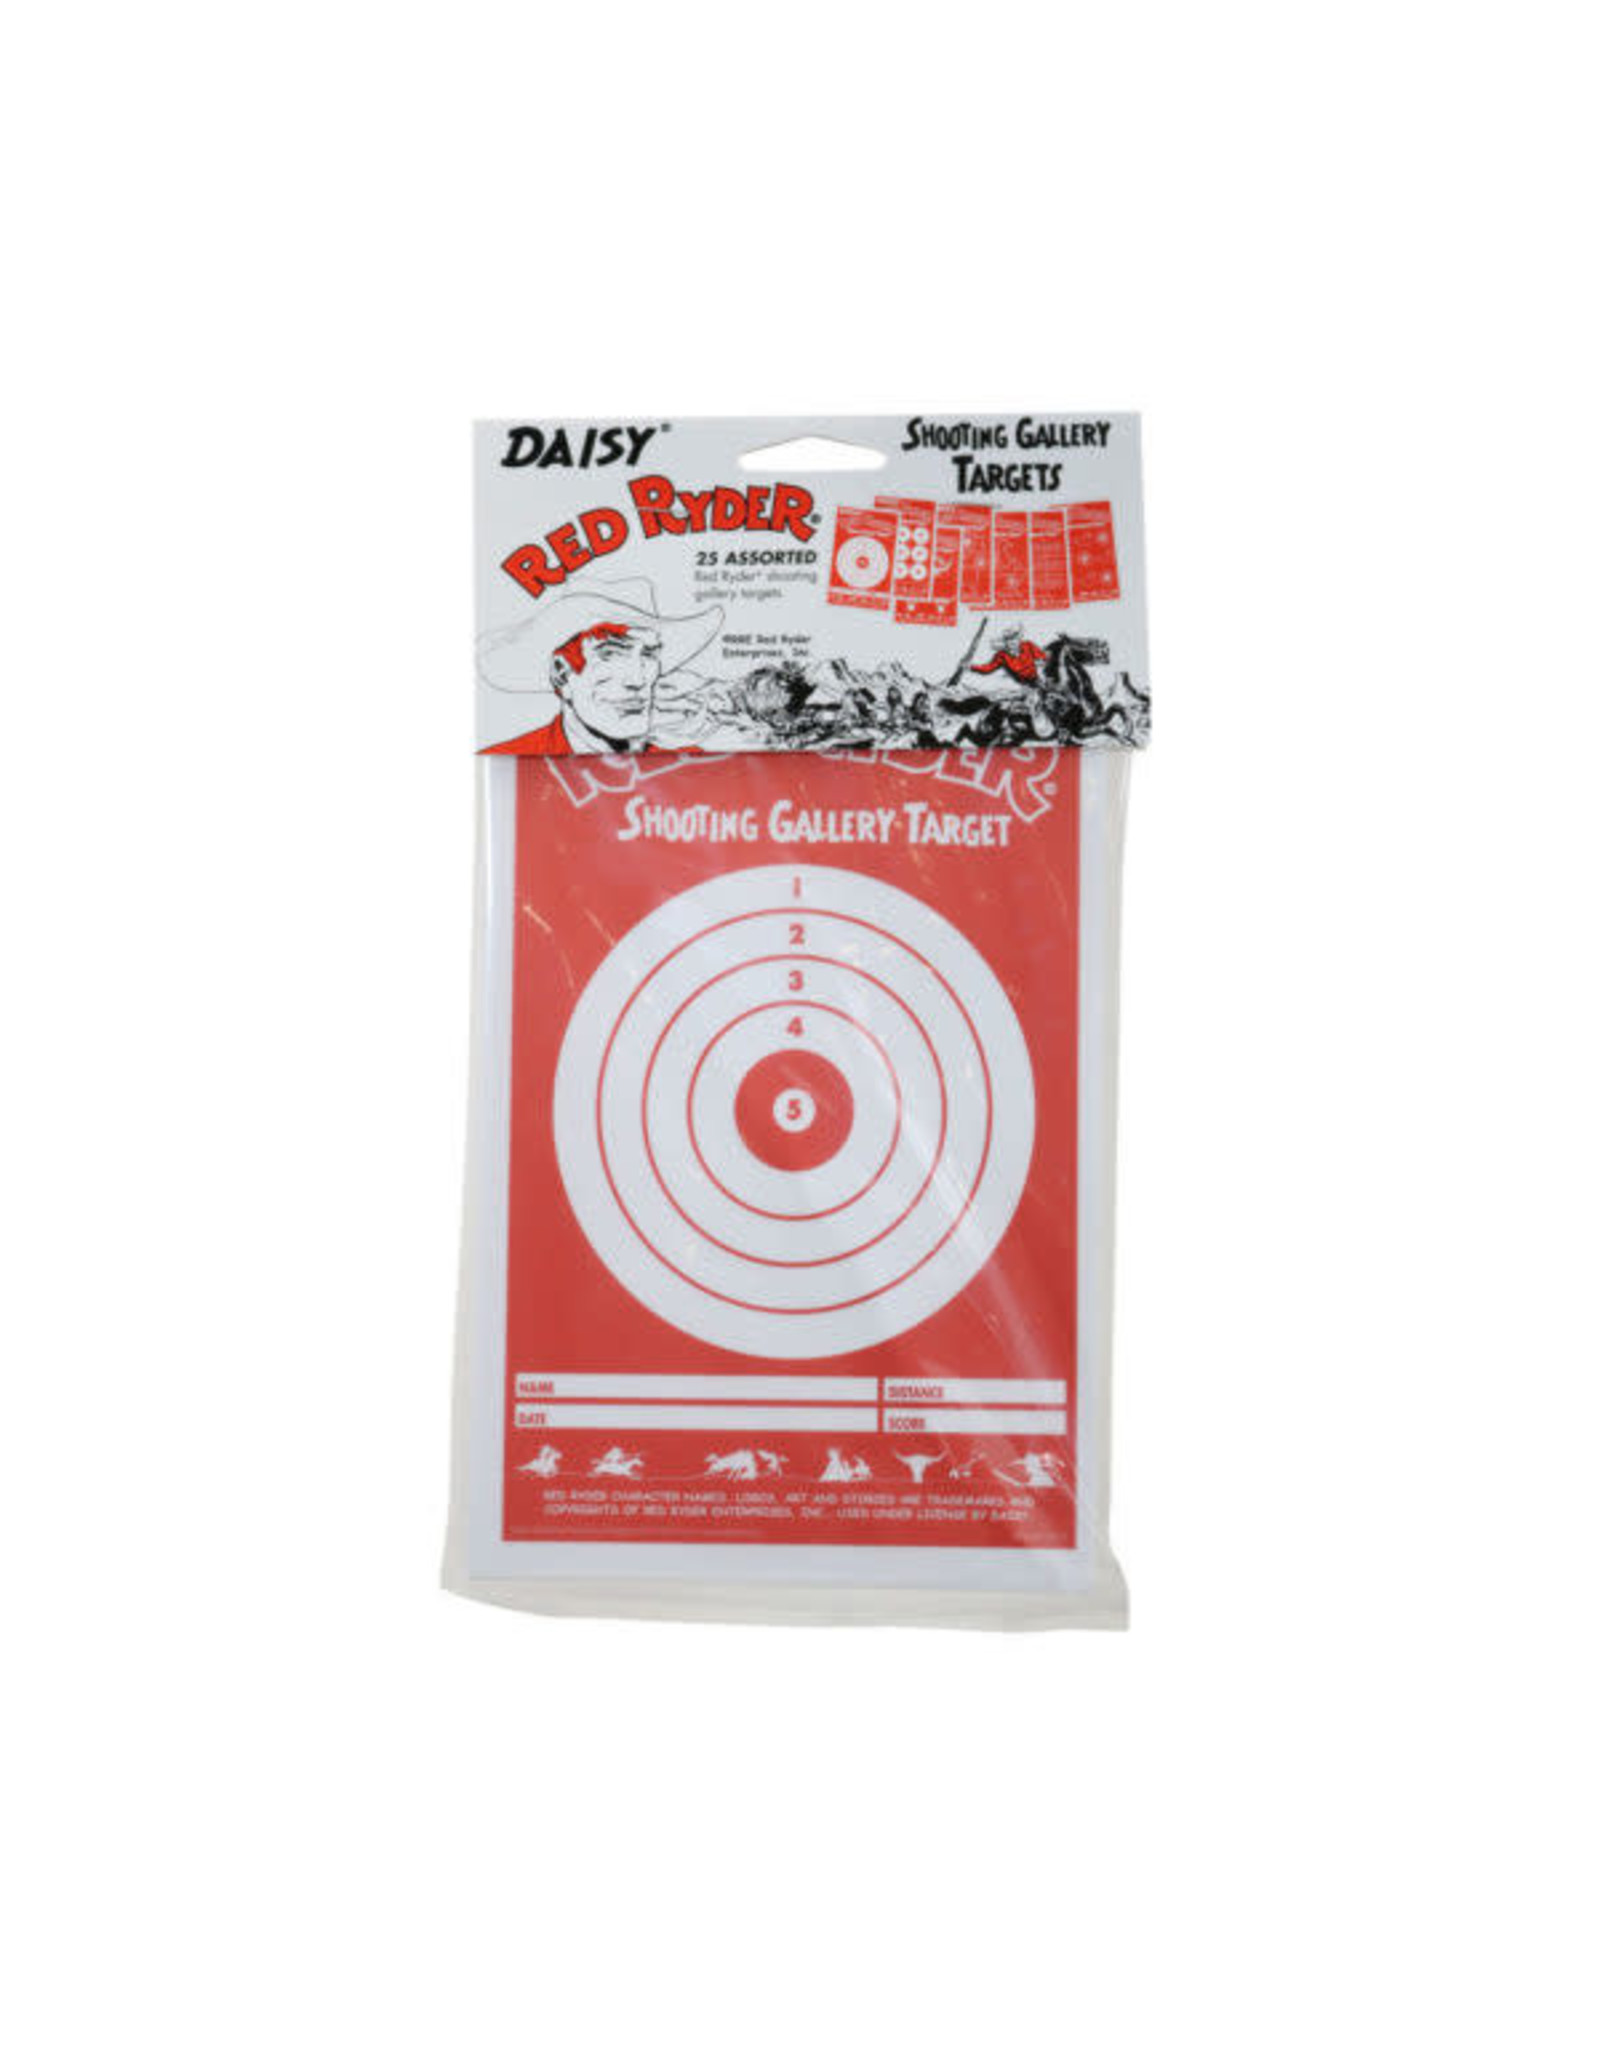 Daisy Daisy Red Ryder Shooting Gallery Targets  (25 Assorted)